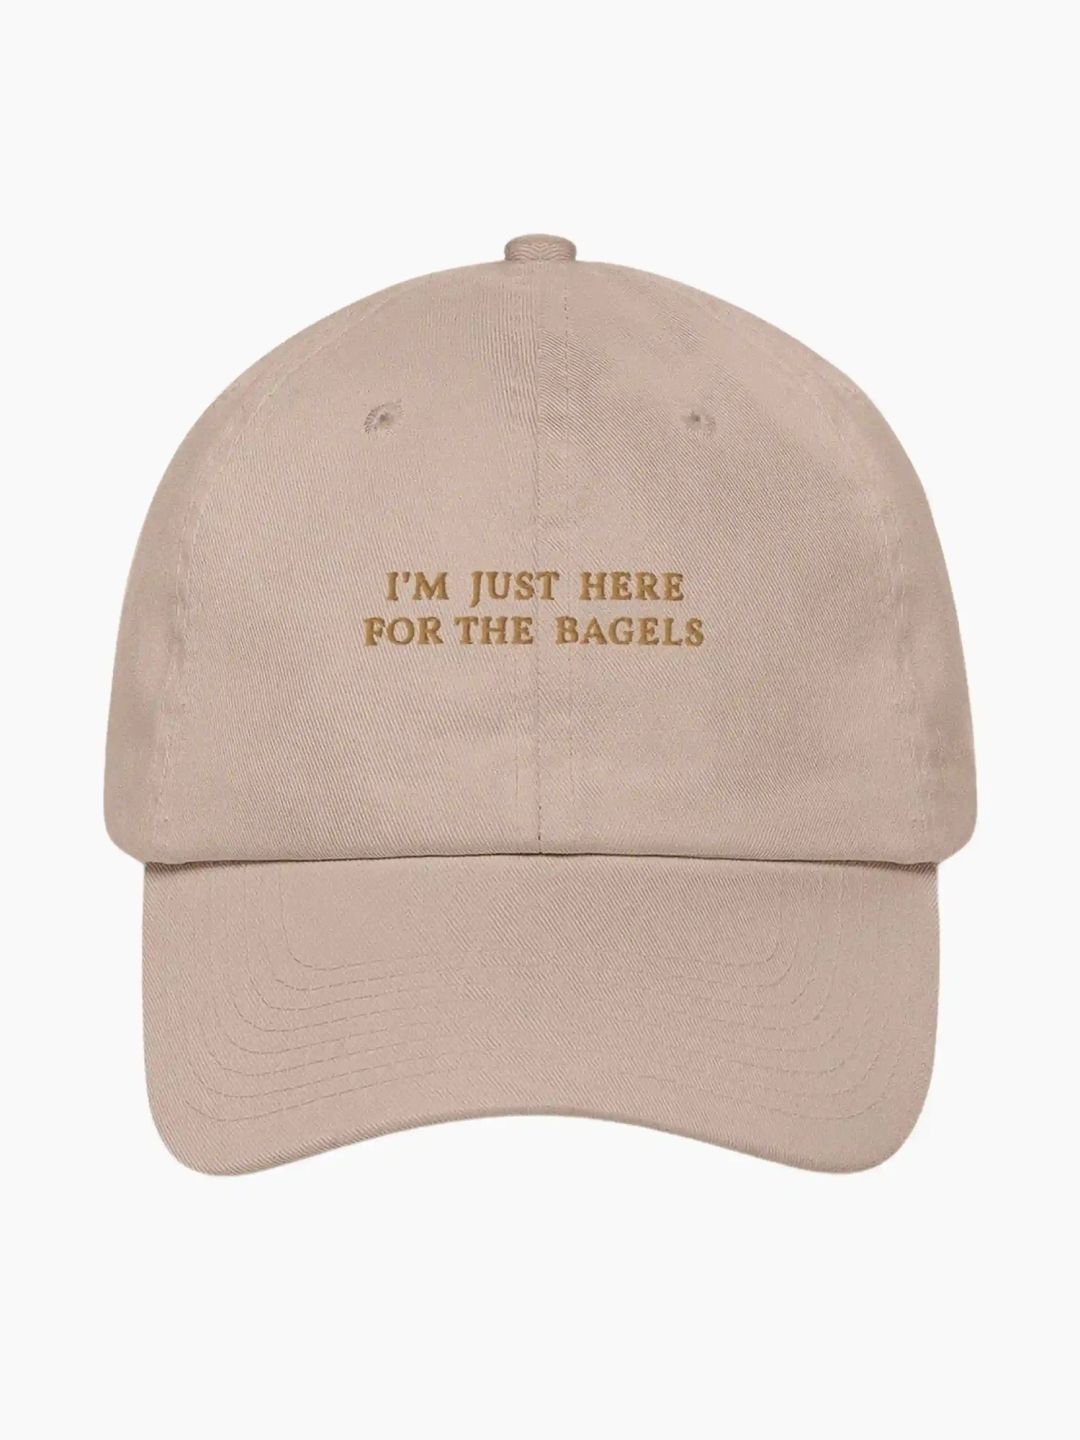 "I'm Just Here For The Bagels" Cap - The Refined Spirit